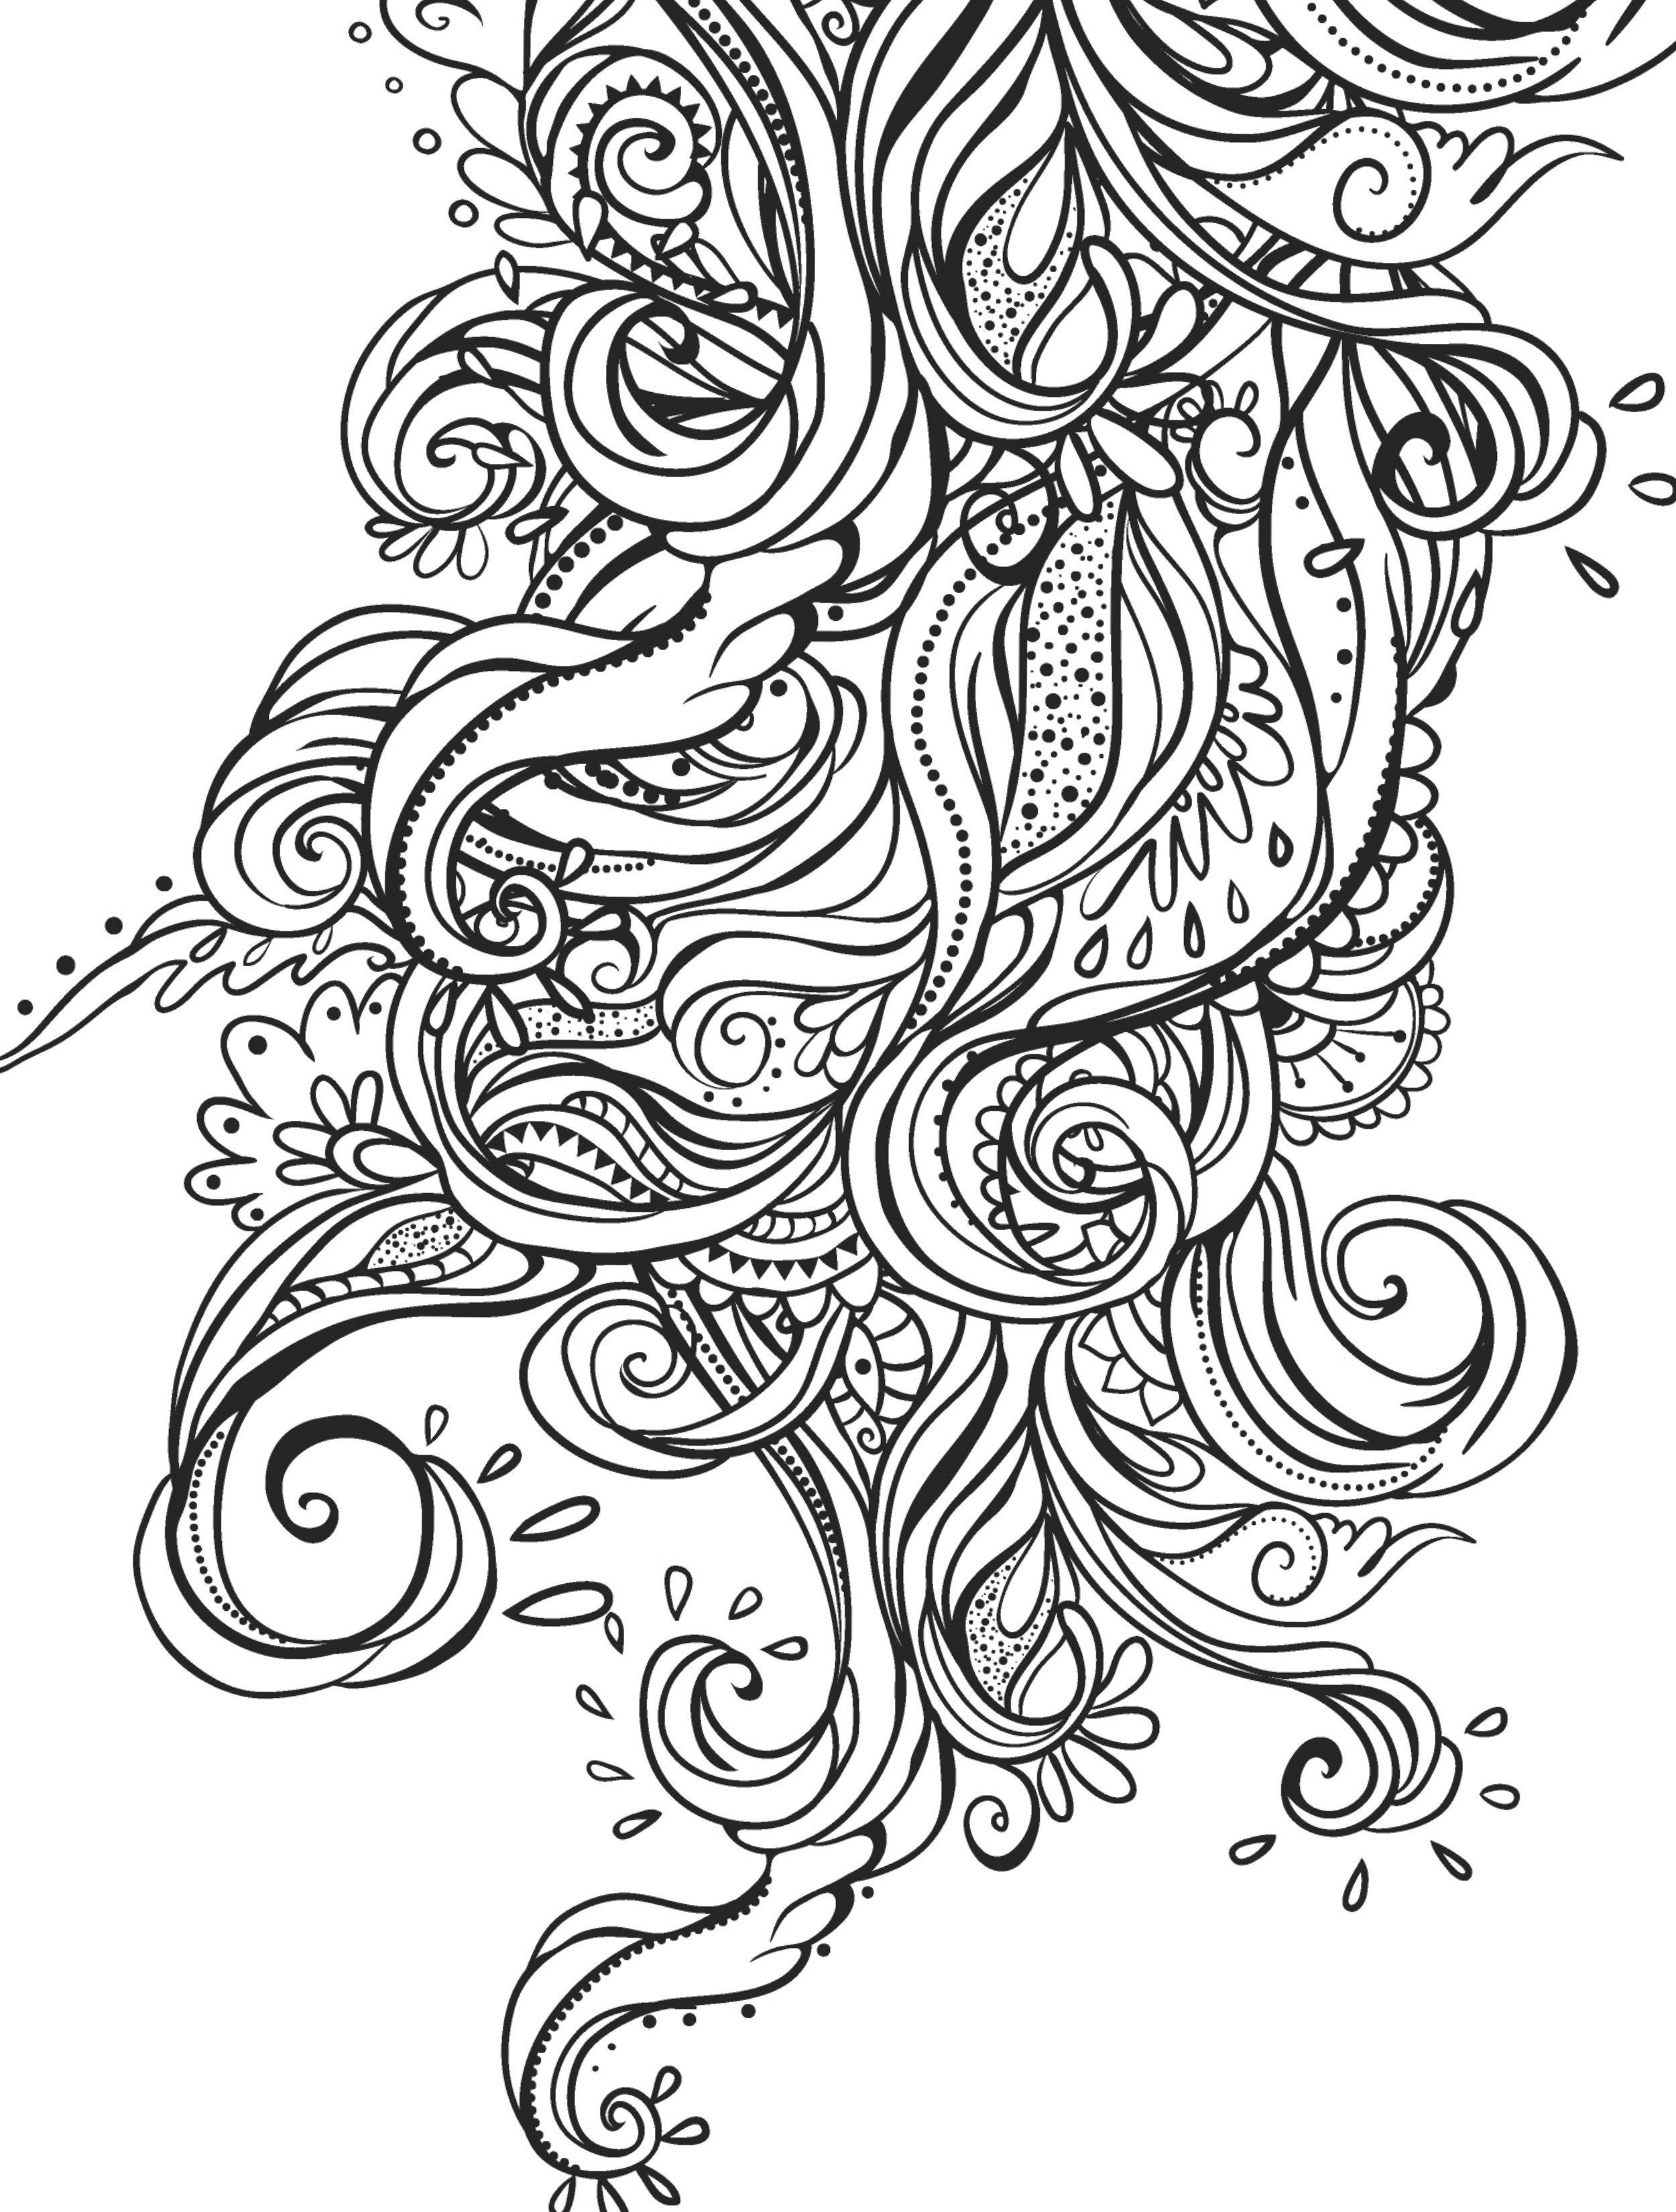 Crazy busy coloring pages for adults skull coloring pages easy coloring pages abstract coloring pages